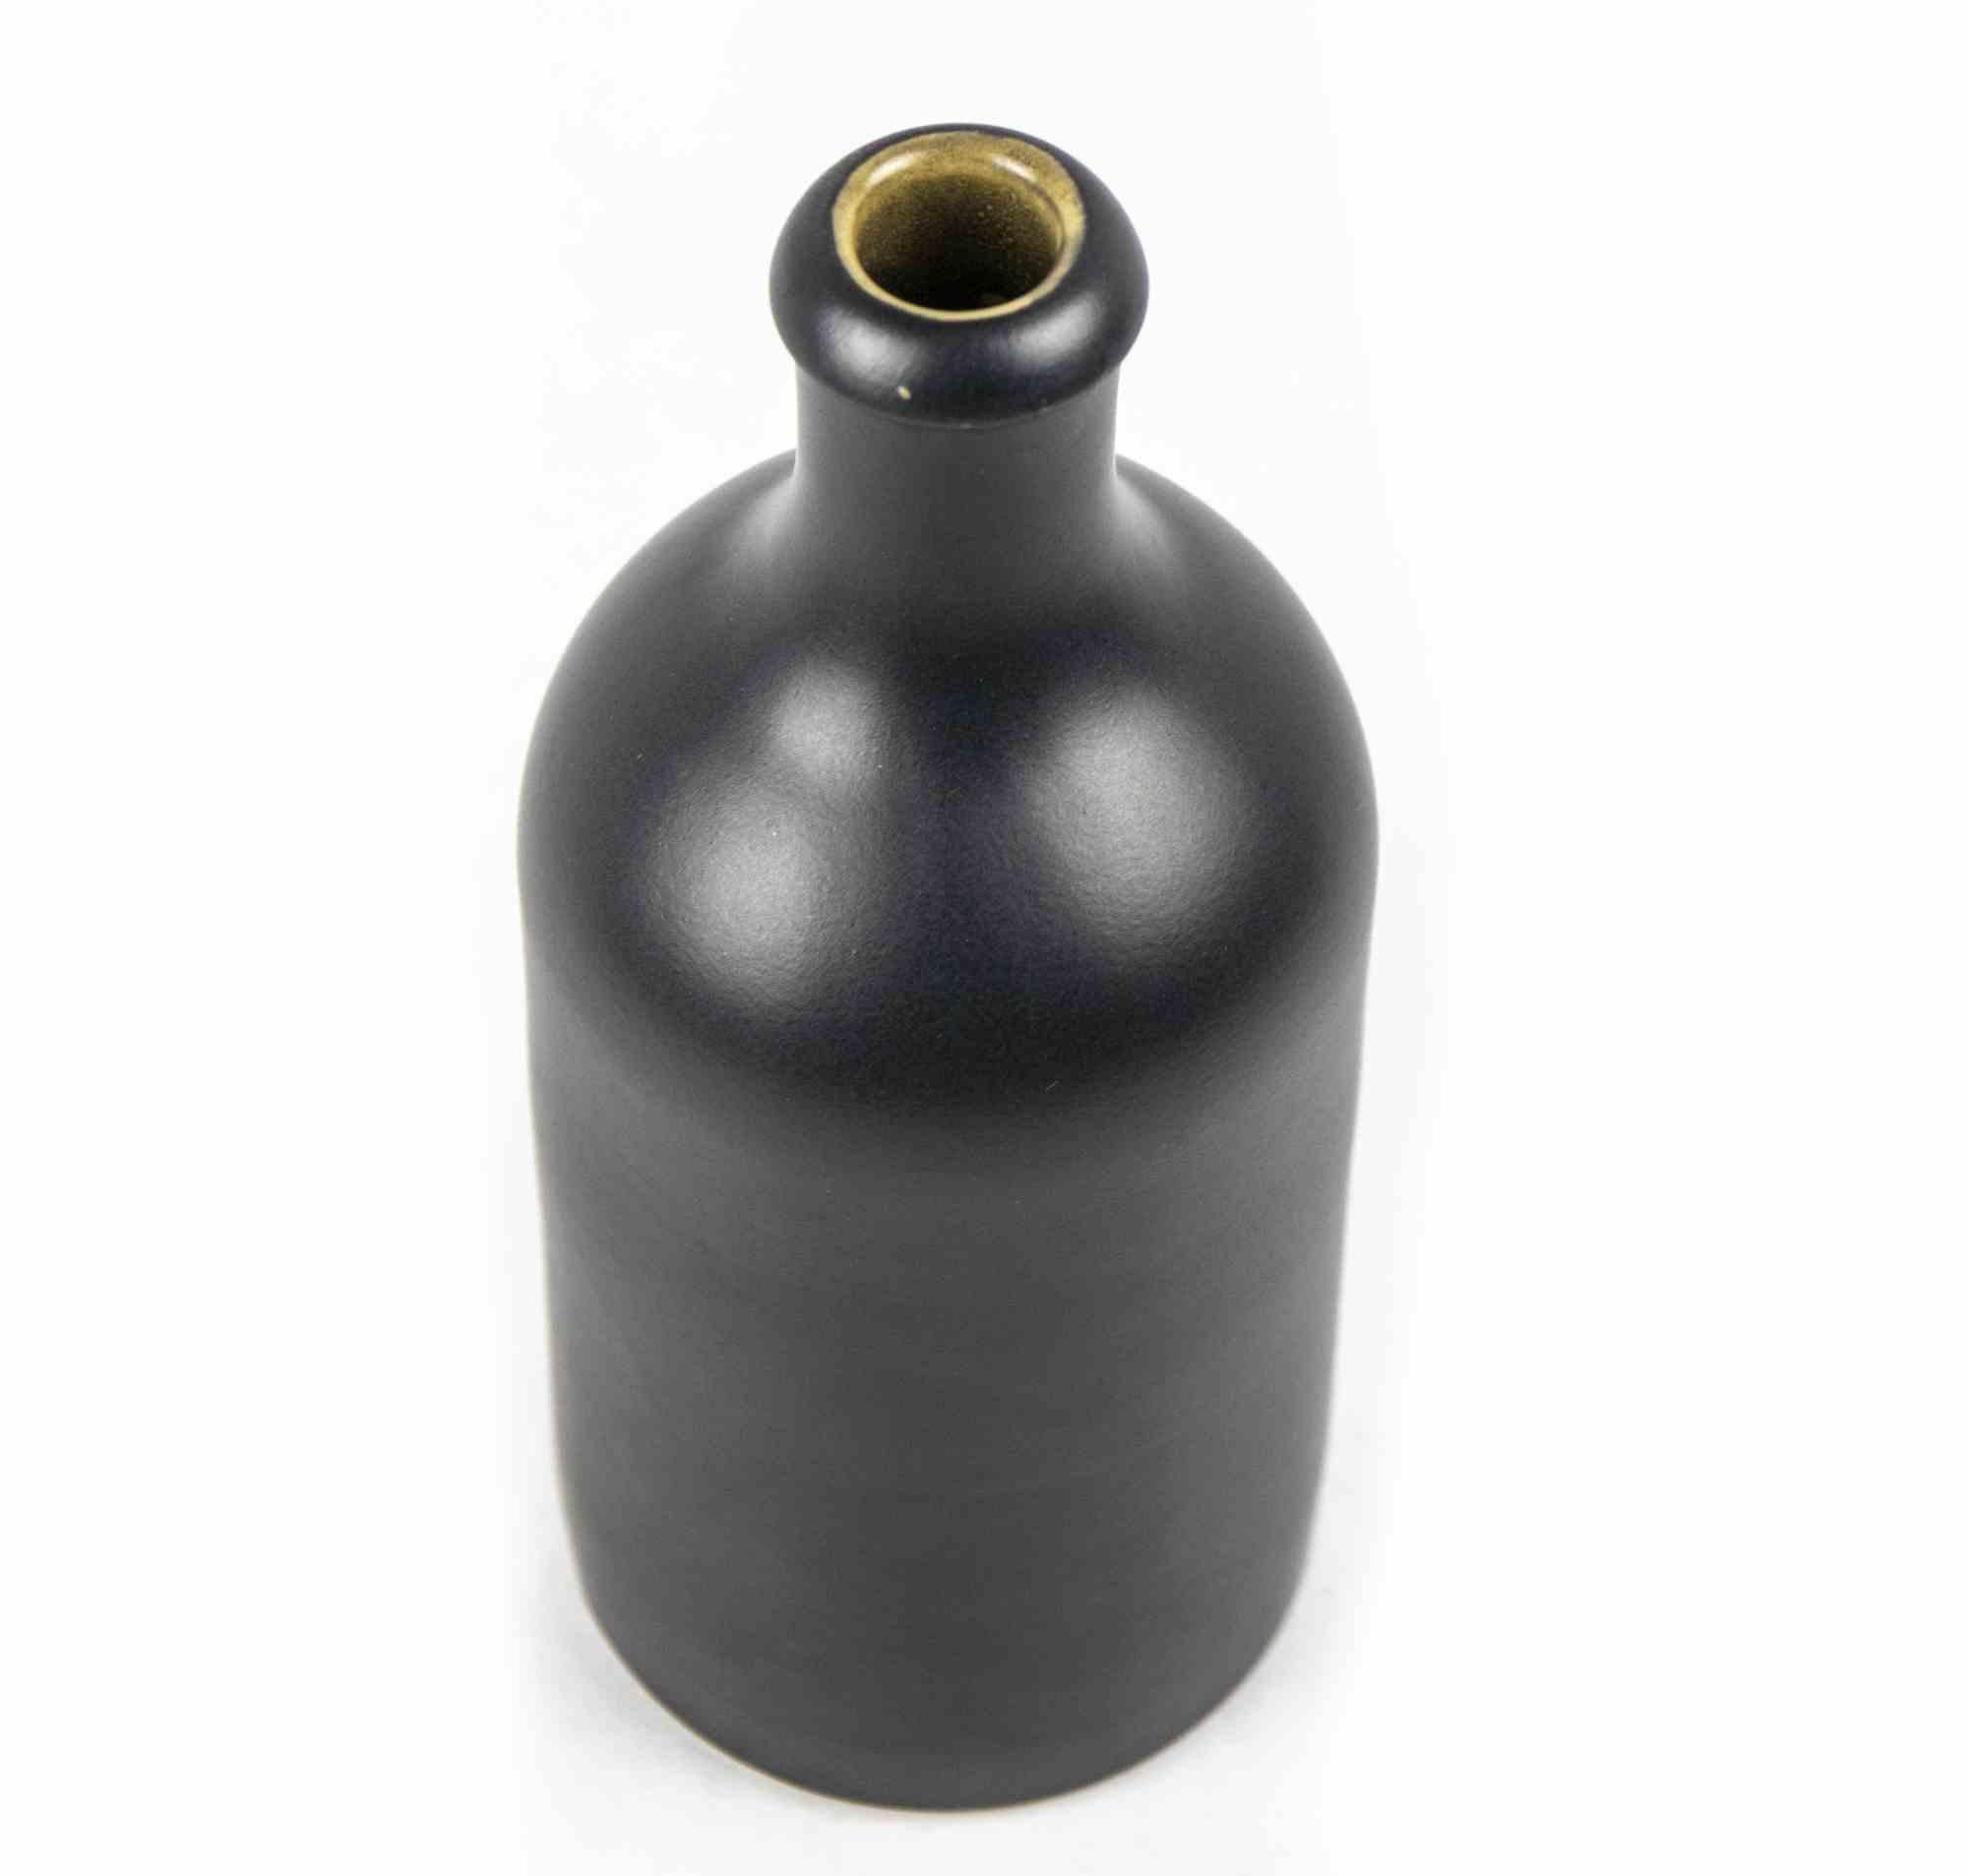 Vintage MKM stoneware is an original decorative object realized in the 1970s.

A vintage M.K.M. Keramik stoneware bottle with a cylindrical body leading up to a narrow neck.

Dark grey colored. Marked on lower part. Perfect to preserve oil